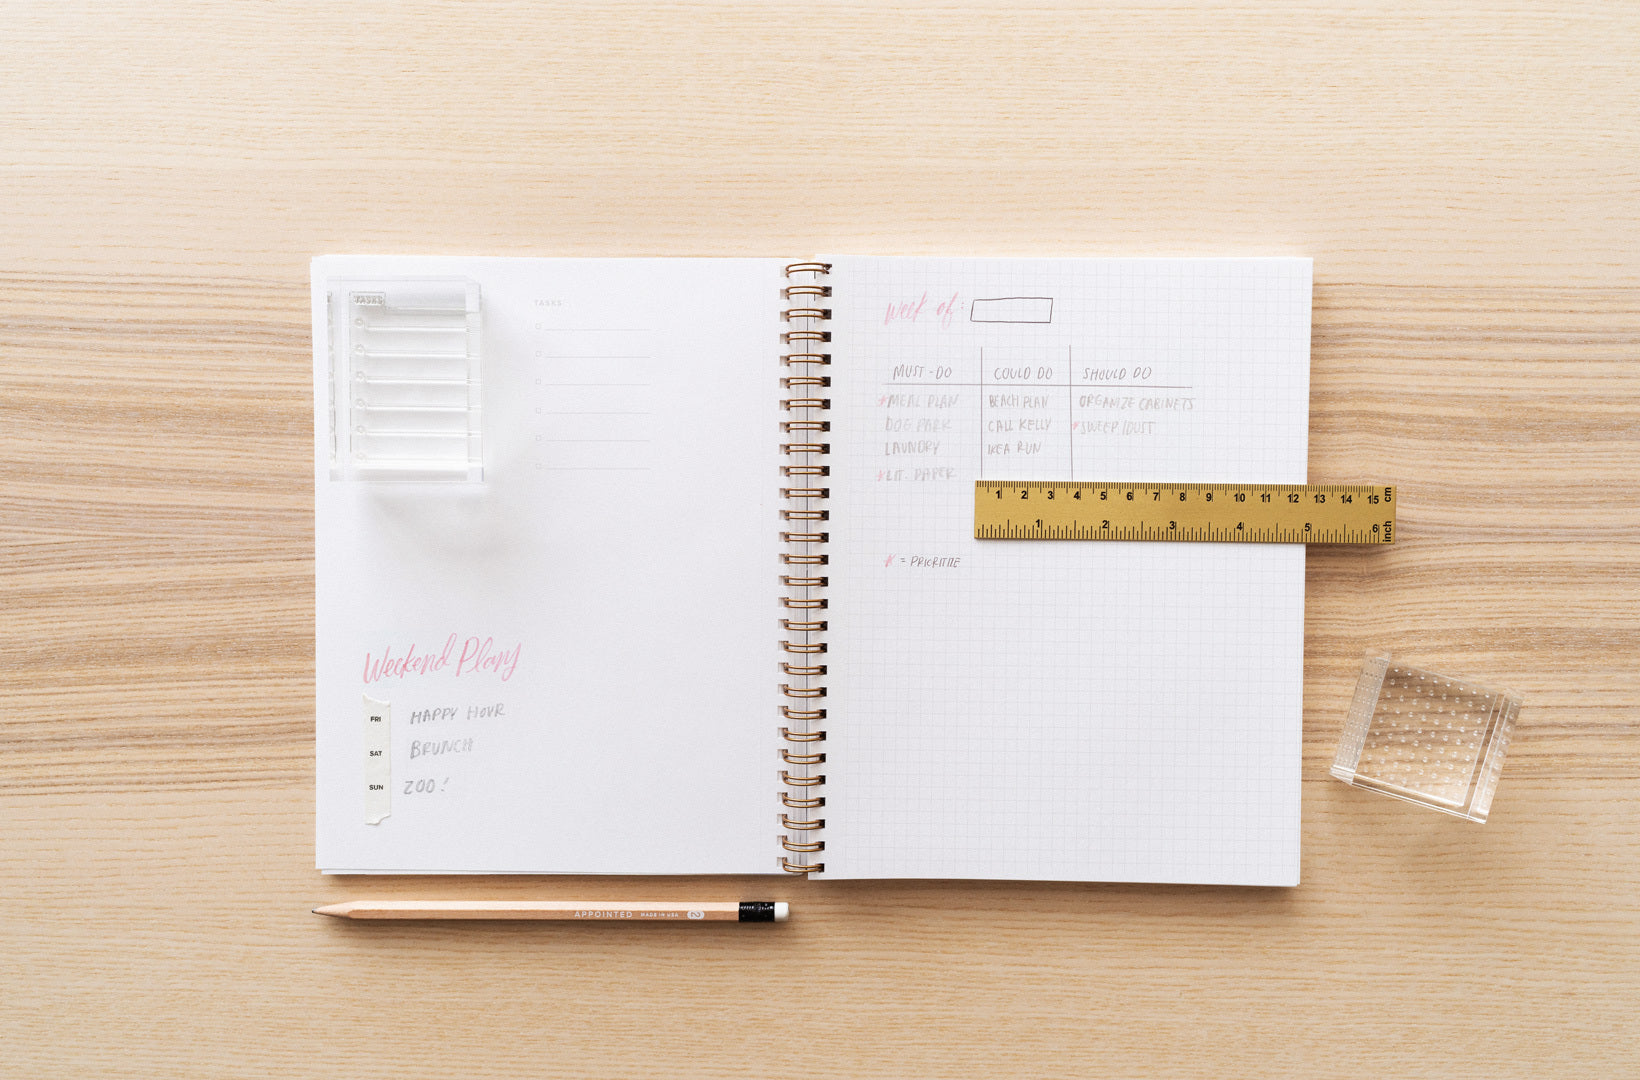 A notebook lies open on a wood desk with stamps, paper taper, and other stationery accessories laid across.